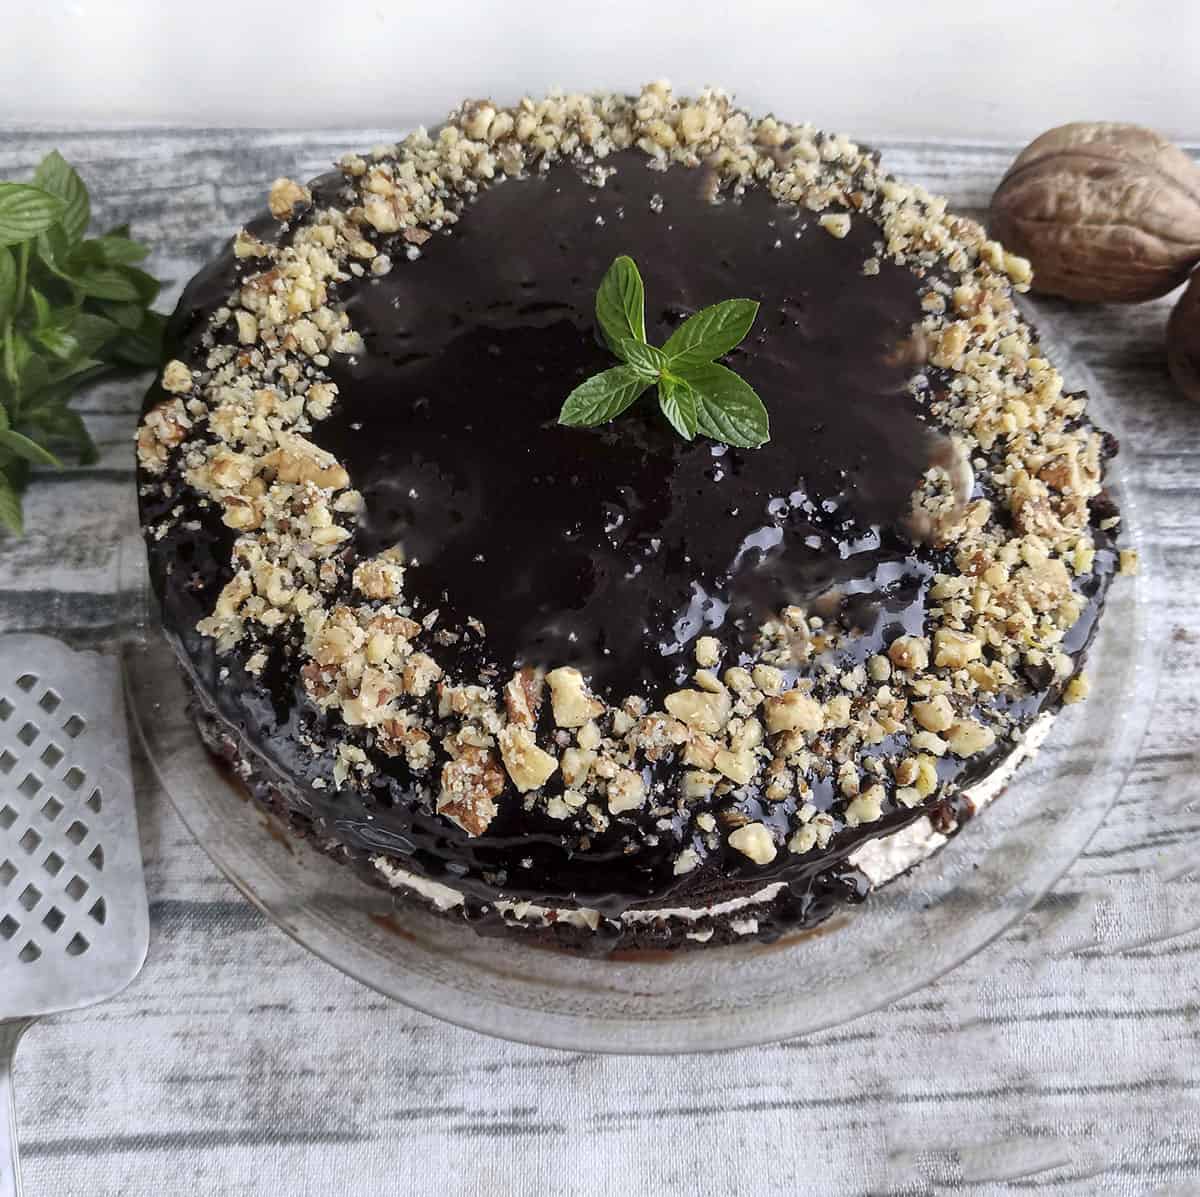 Chocolate cake with walnuts on a clear plate. A cake server is on the left side of the photo.